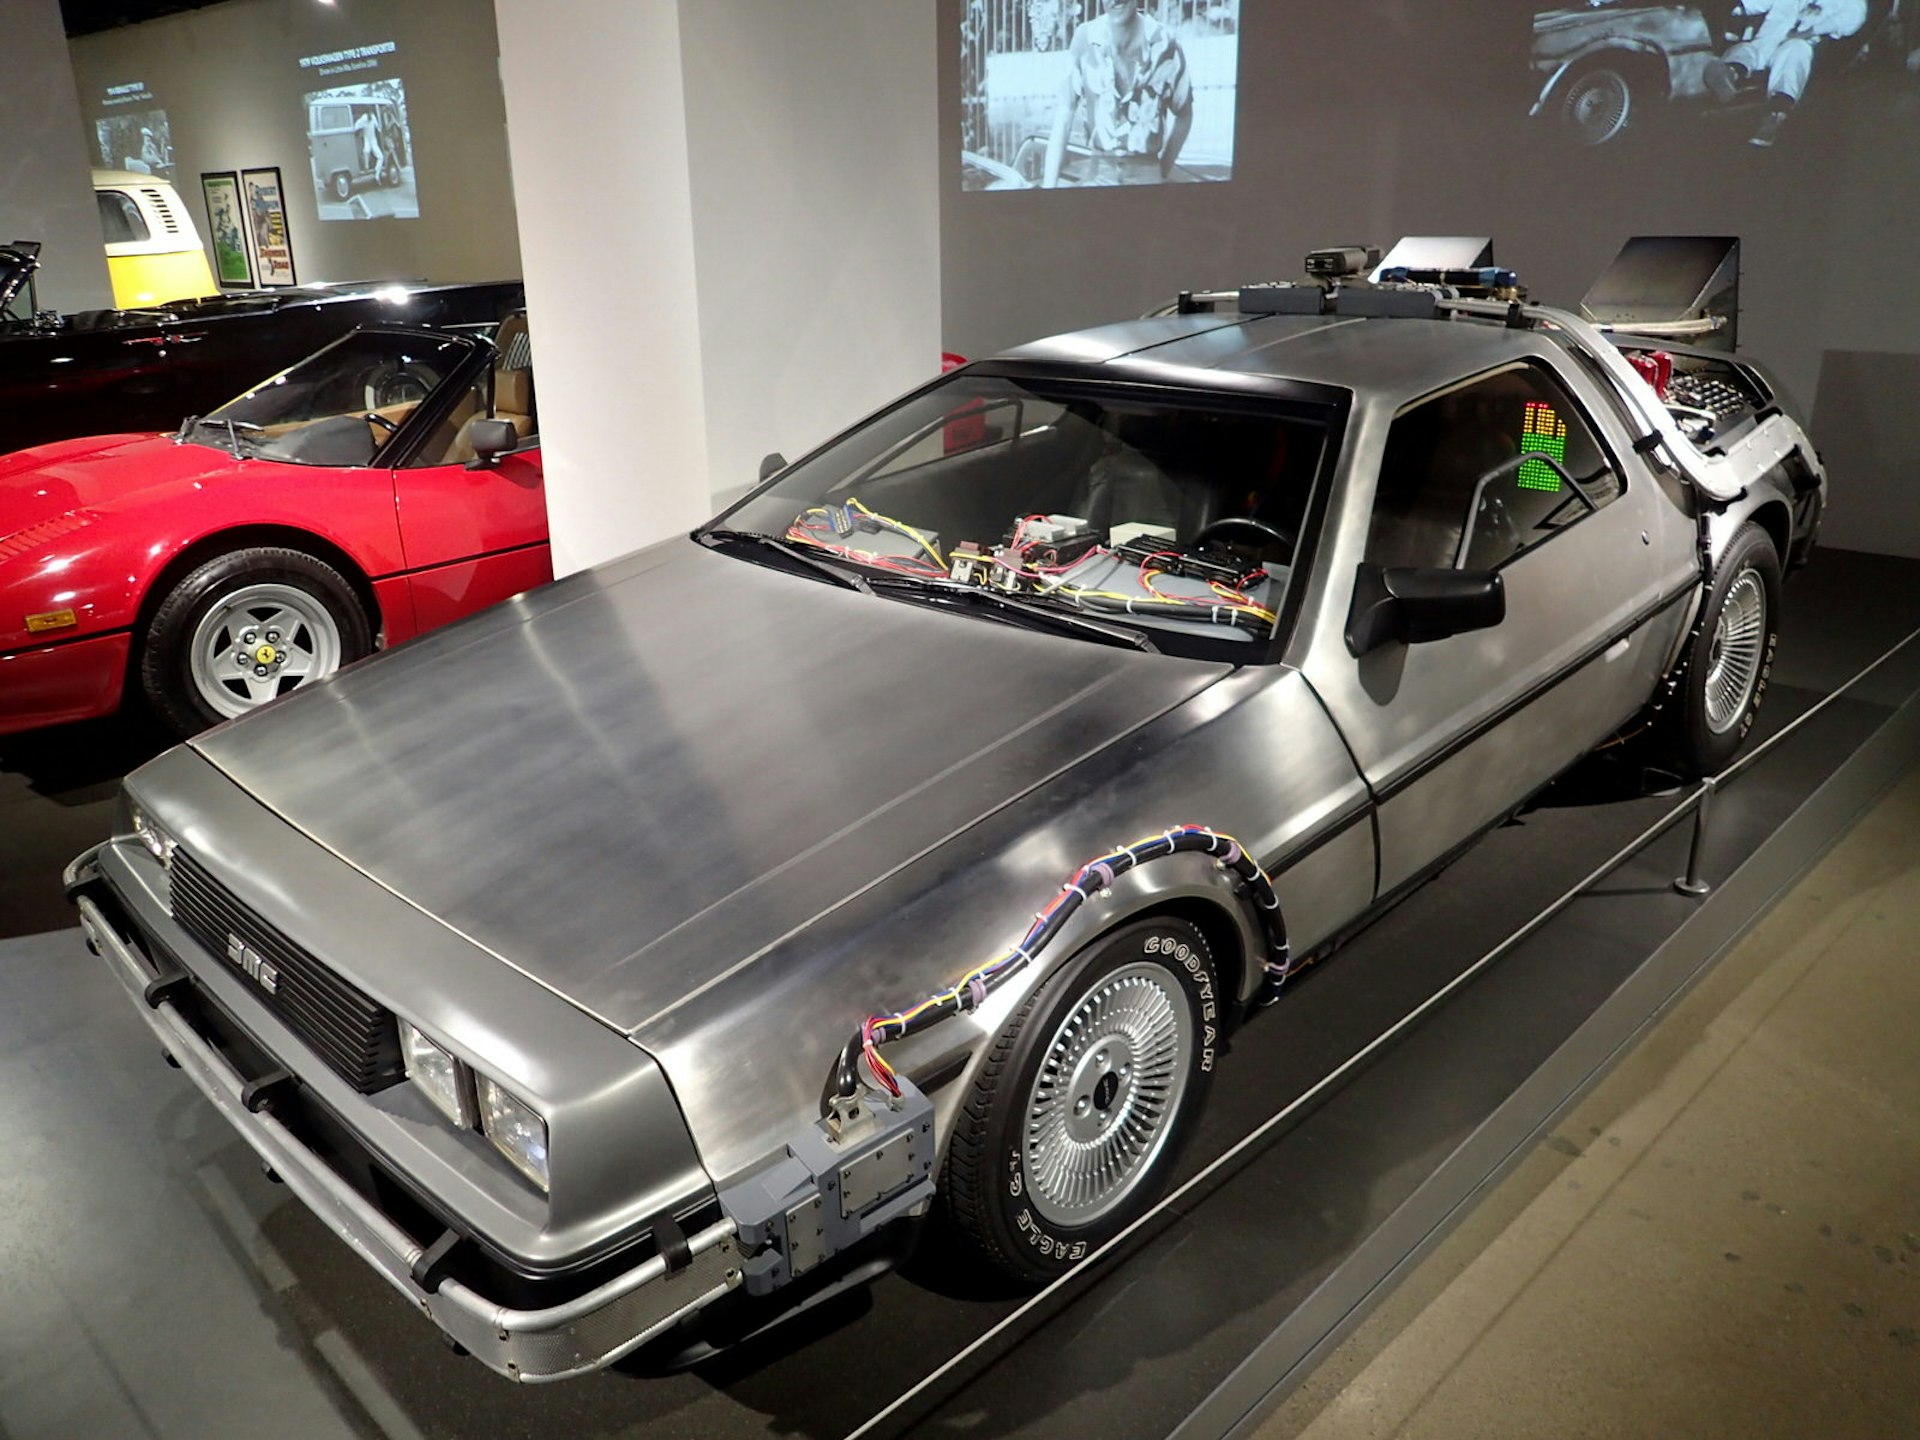 Made famous by Marty and Doc, the Delorean is one of many famous cars in the Petersen Automotive Museum © Tim Richards / Lonely Planet